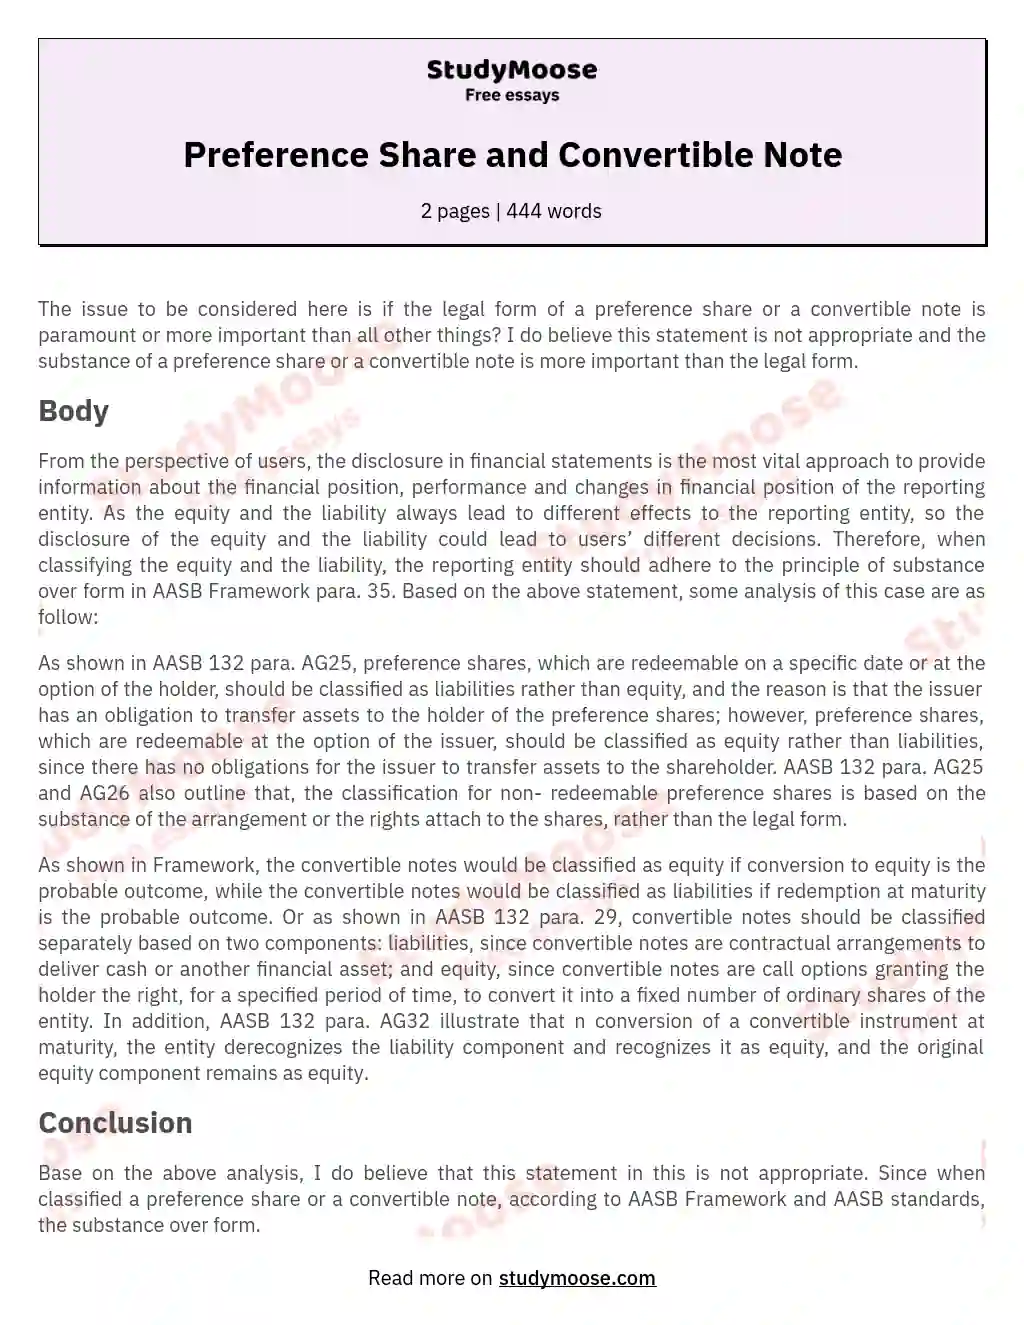 Preference Share and Convertible Note essay